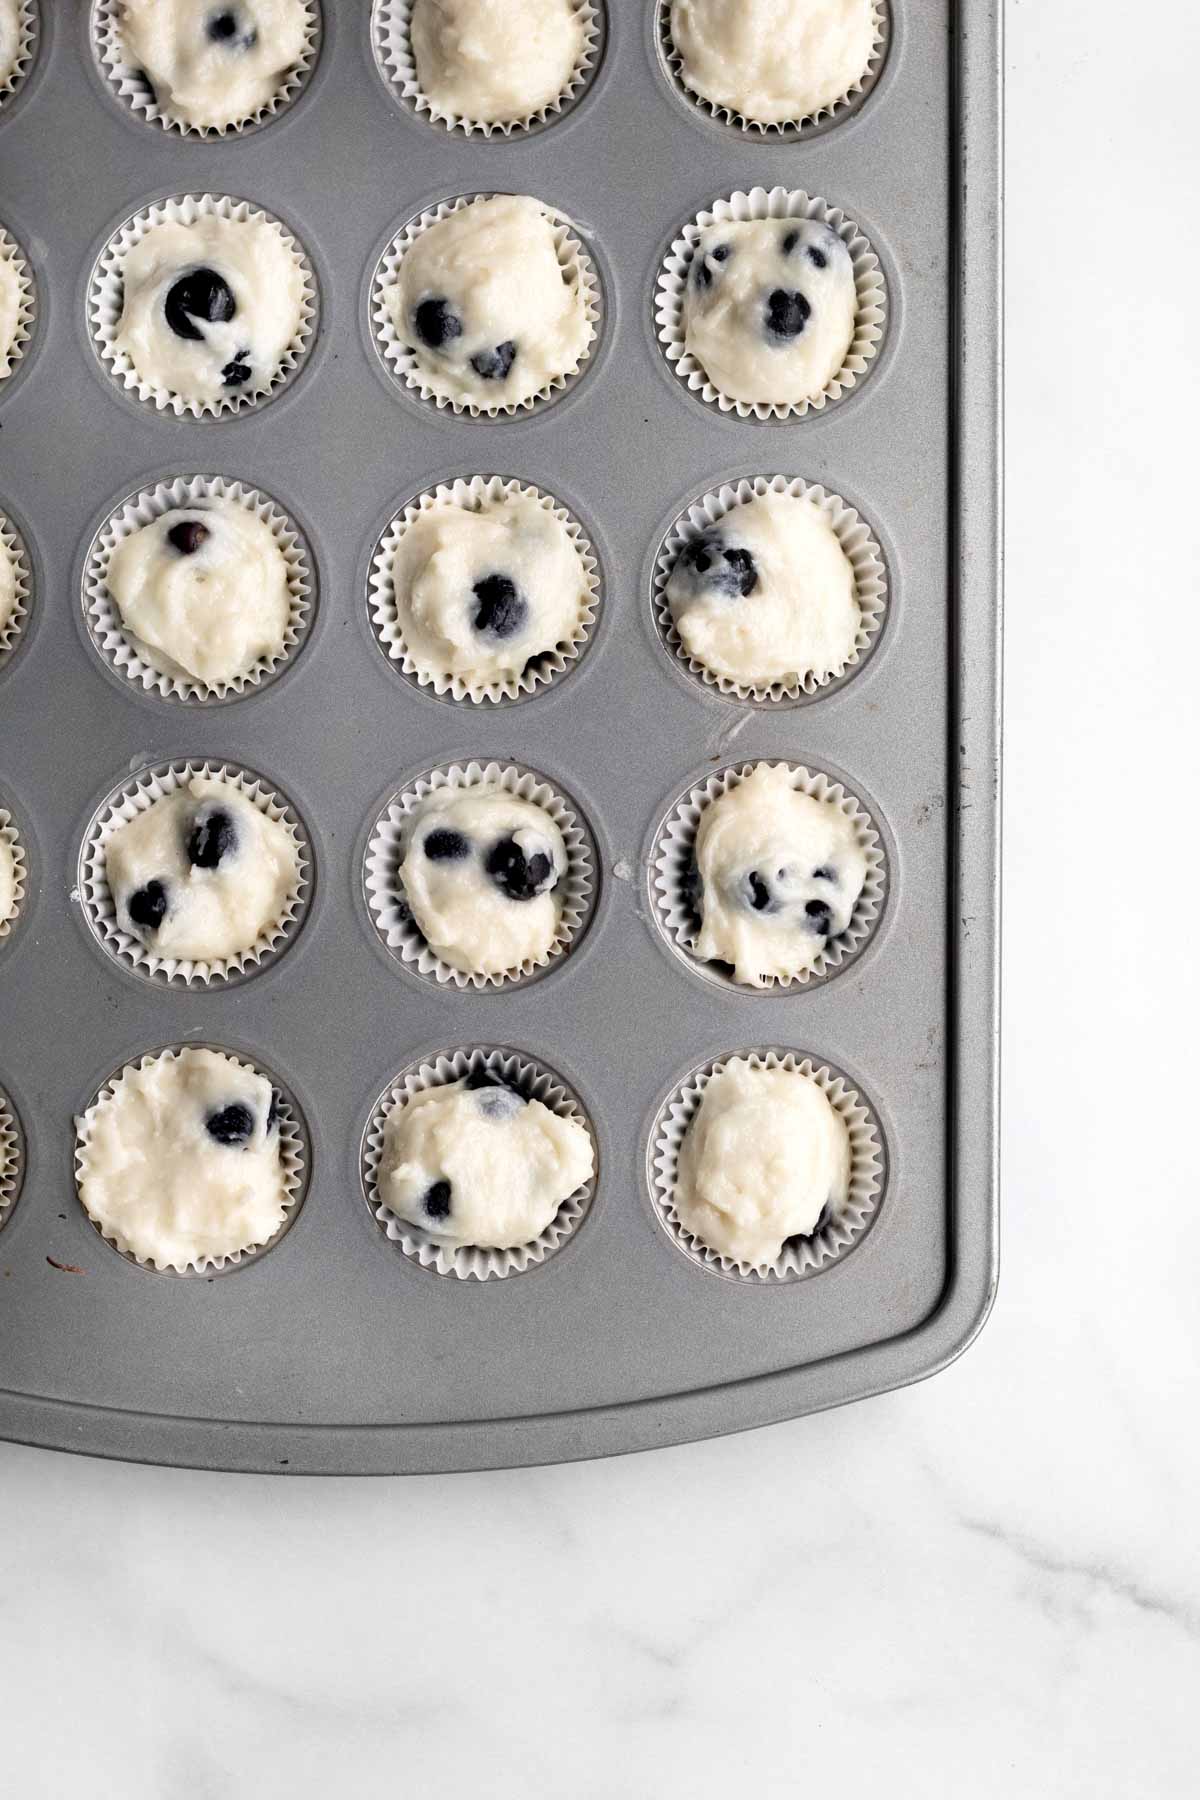 Putting the batter into muffin wrappers in a muffin tin.